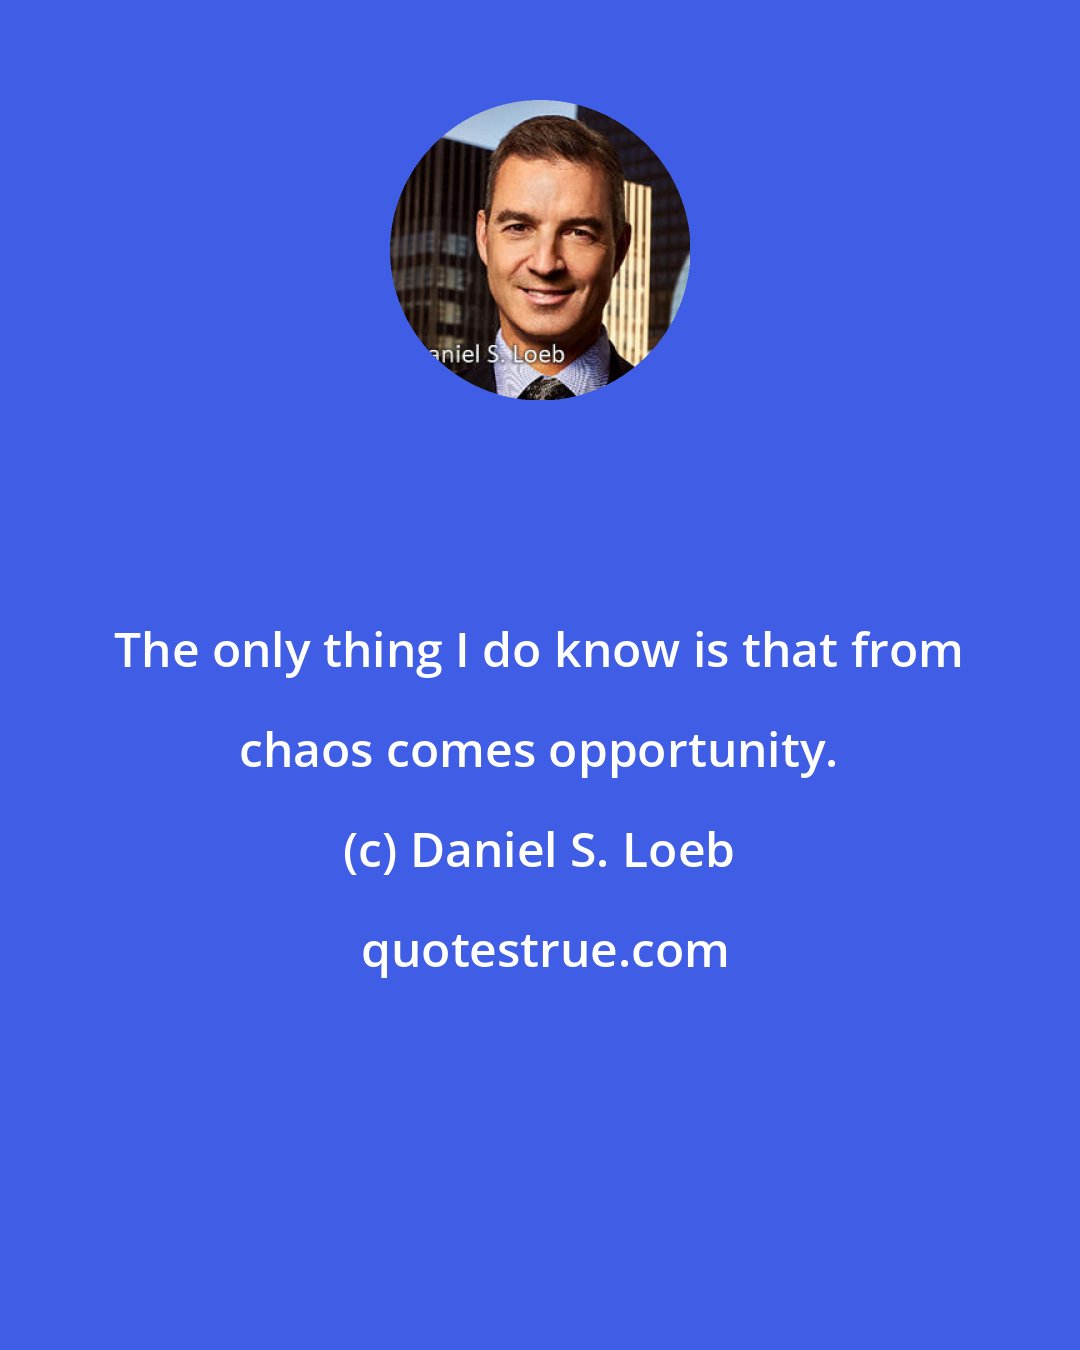 Daniel S. Loeb: The only thing I do know is that from chaos comes opportunity.